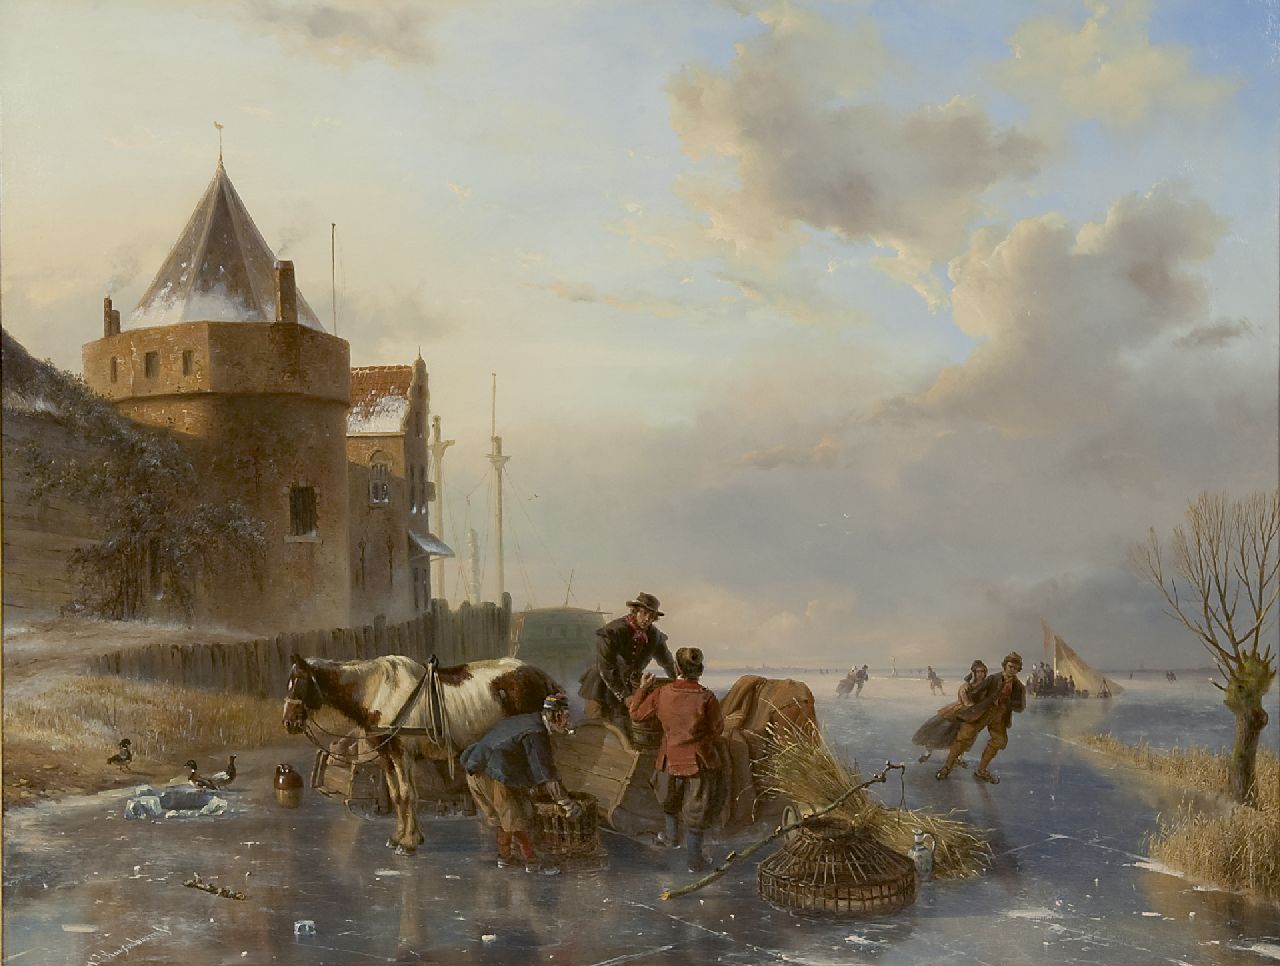 Roosenboom N.J.  | Nicolaas Johannes Roosenboom, Unloading the horse's sledge near the Schreierstoren, Amsterdam, oil on panel 63.5 x 83.4 cm, signed l.l. and painted between 1844-1845